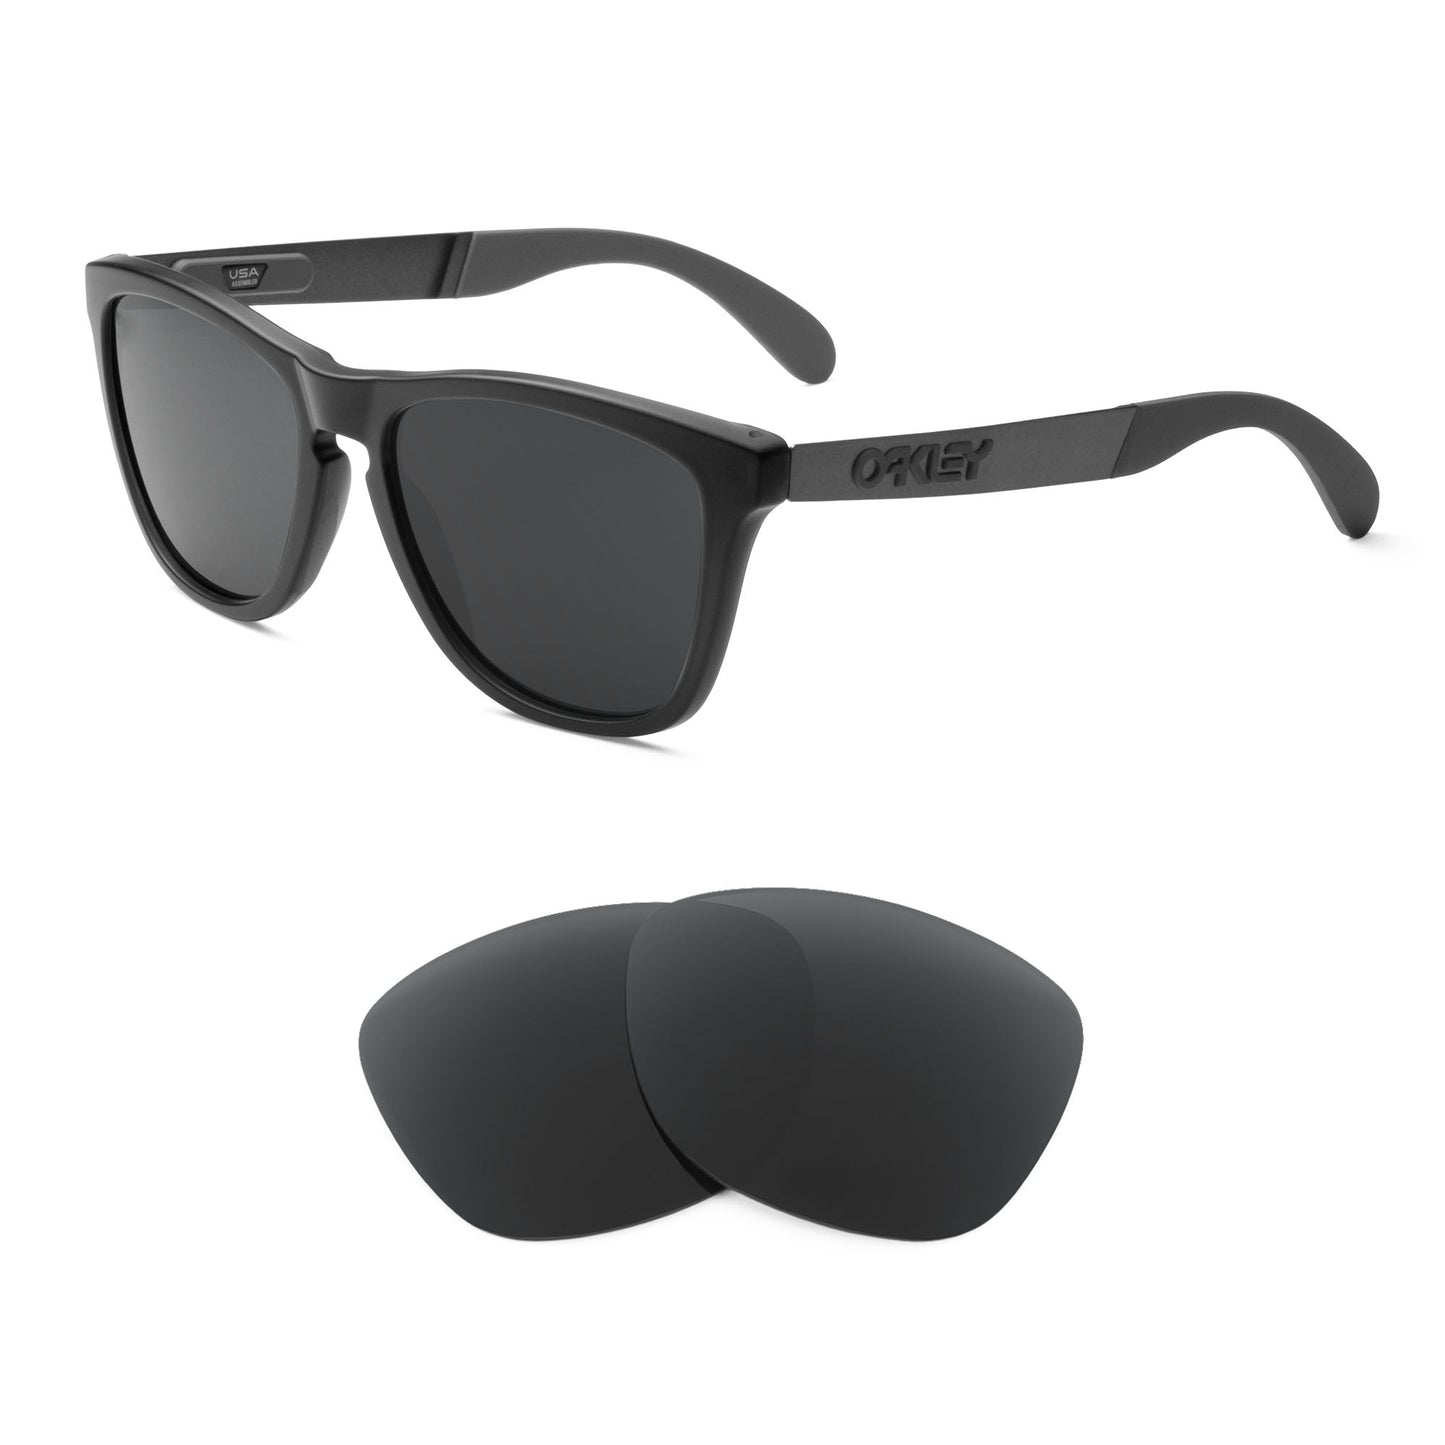 Oakley Frogskins Mix sunglasses with replacement lenses